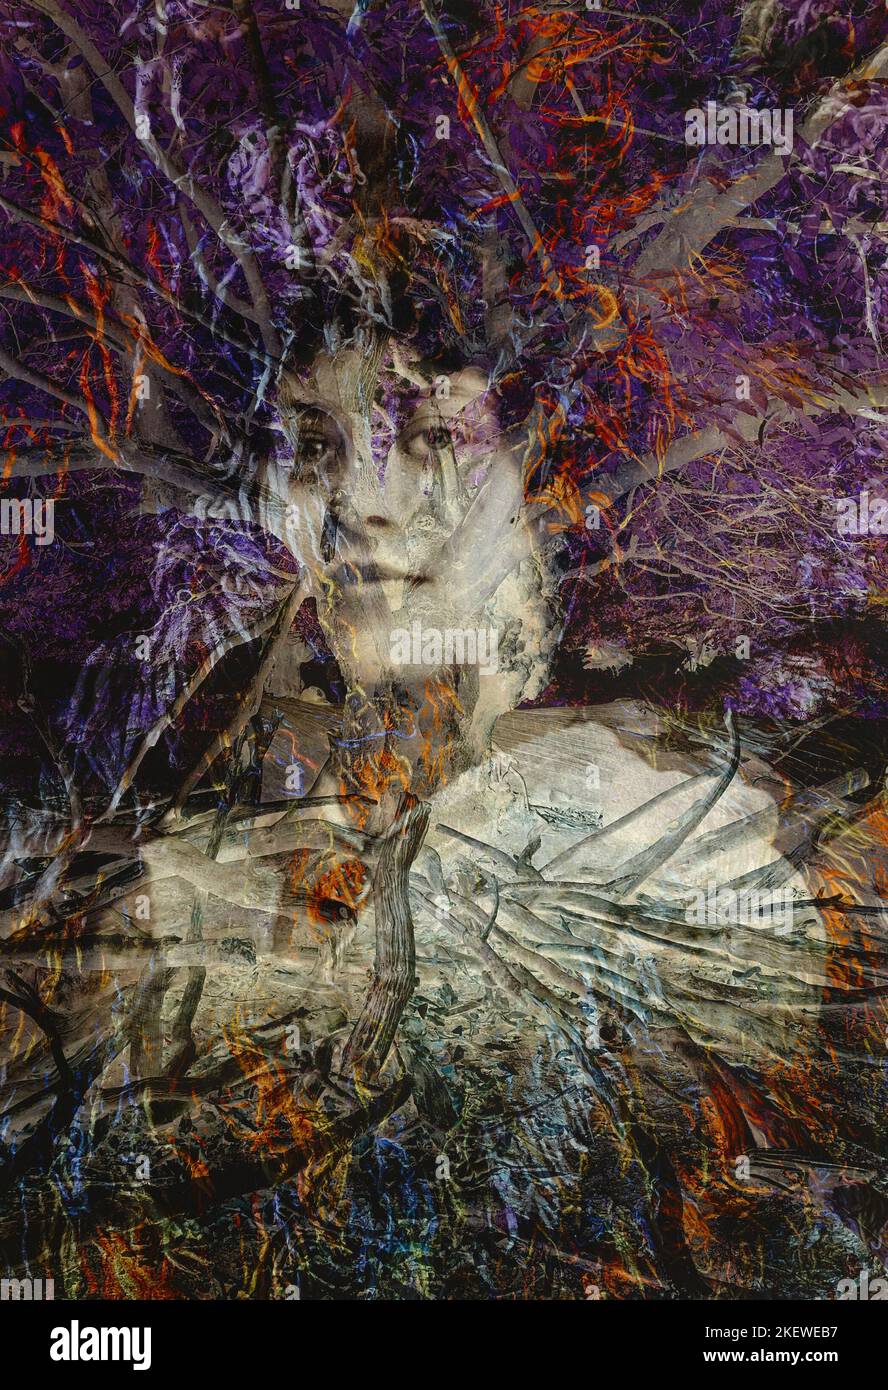 Creative digital montage of two images. Old photograph of an unknown young woman called Olive aged 16 and an old tree with roots Stock Photo